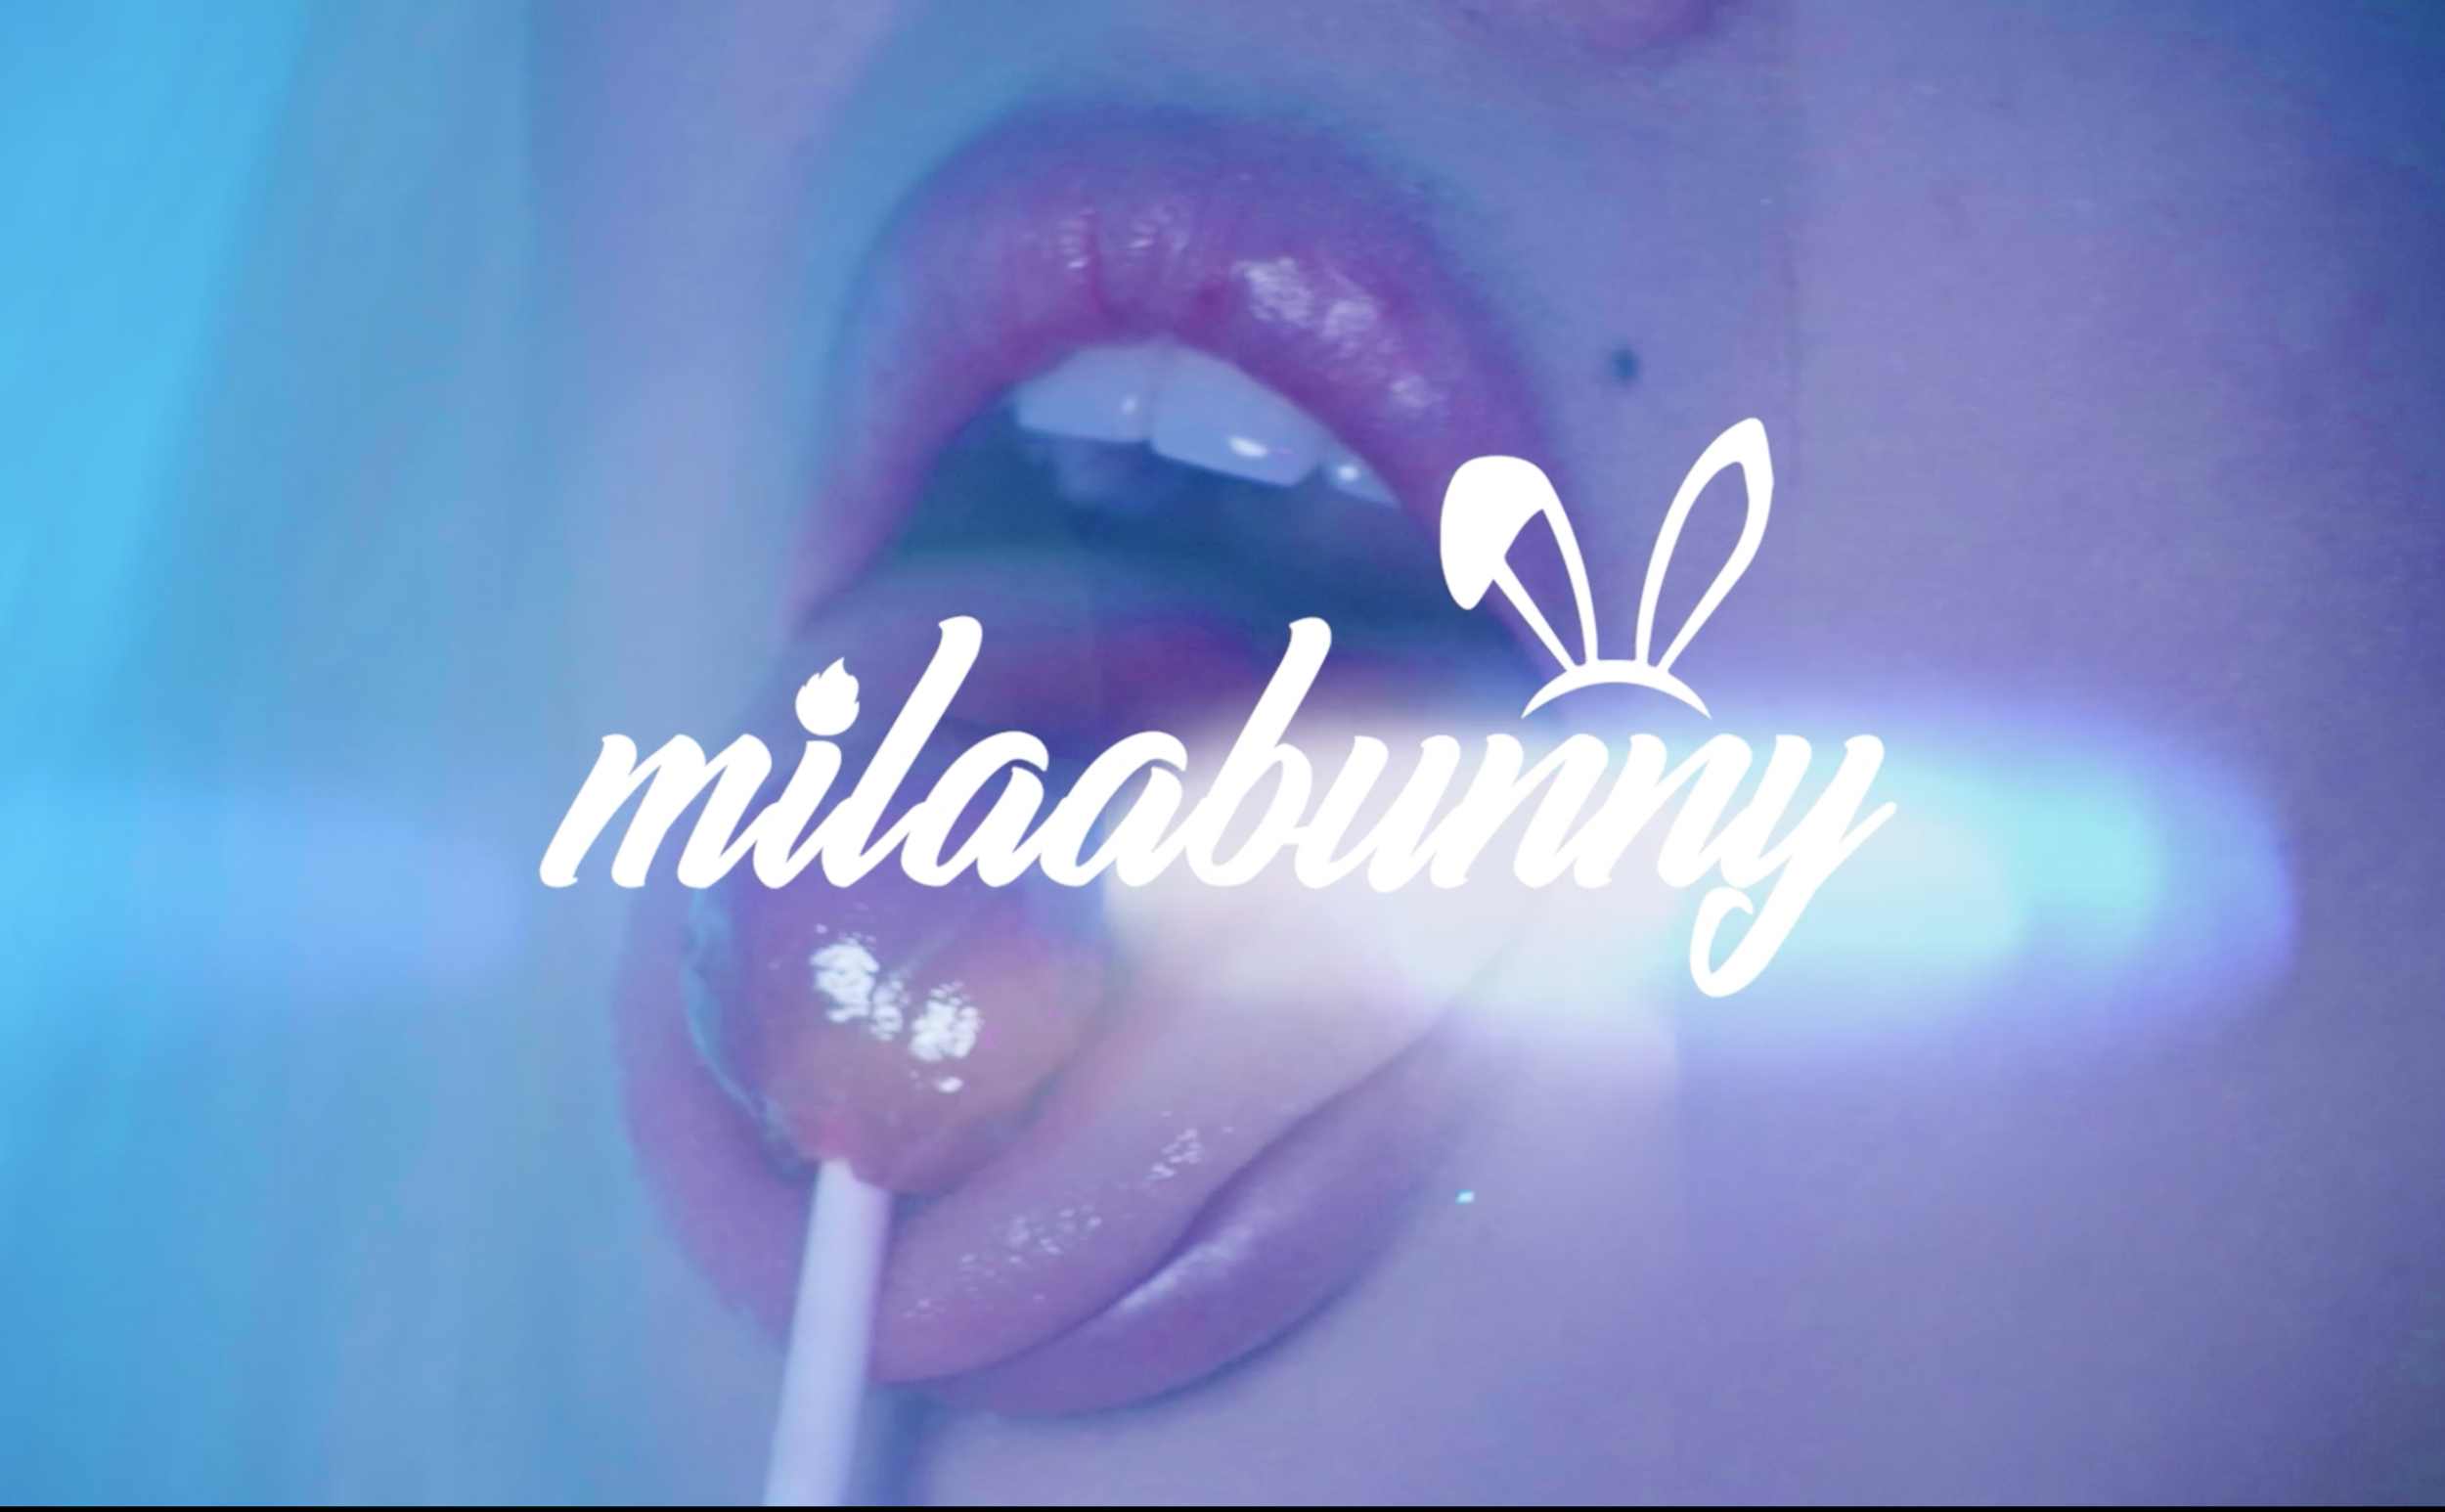 milaabunny - Clouds